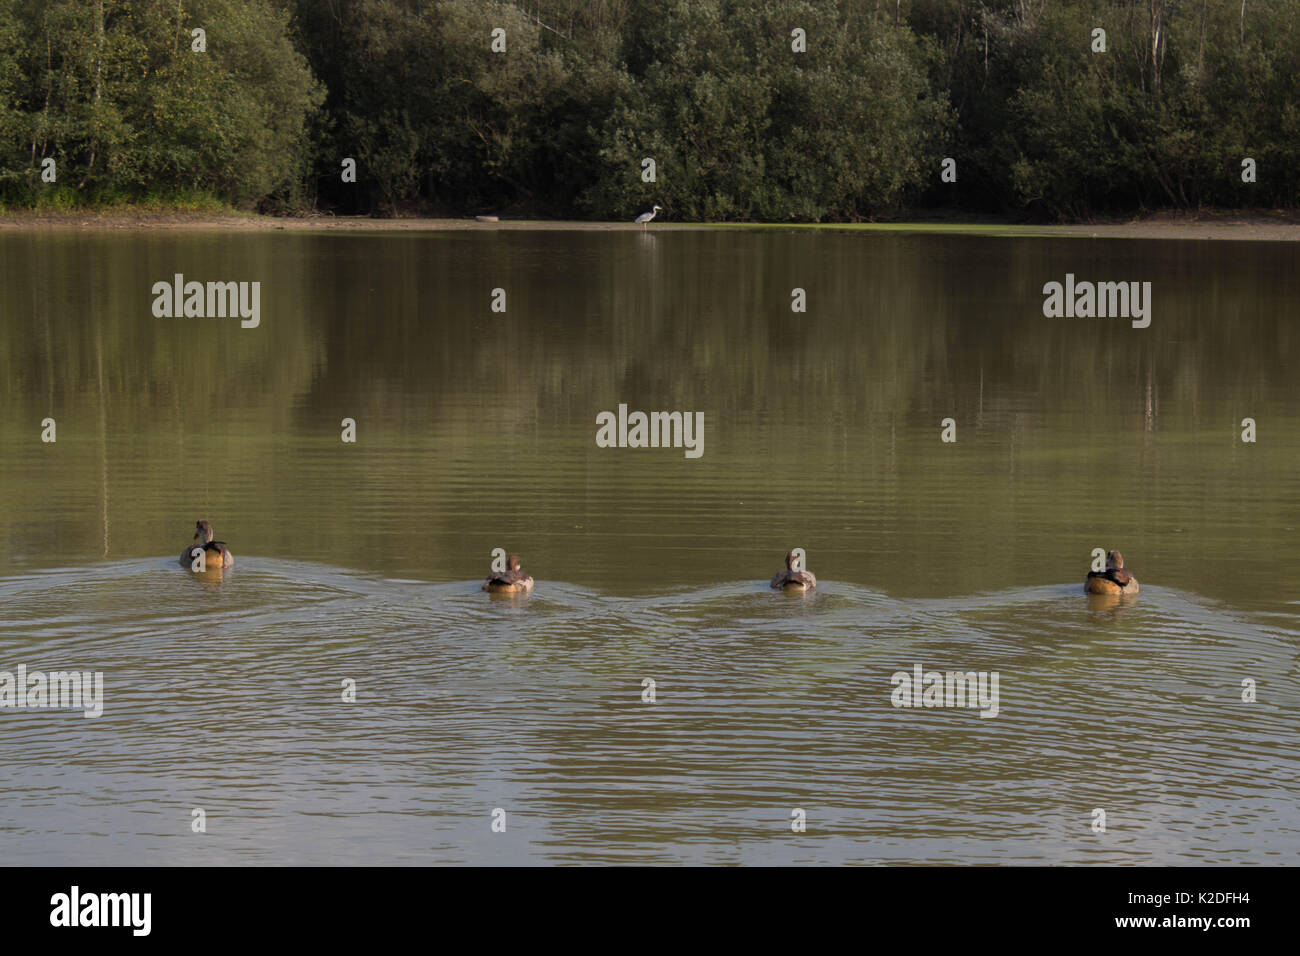 Four ducks swimming symmetric towards one heron in the middle. Stock Photo